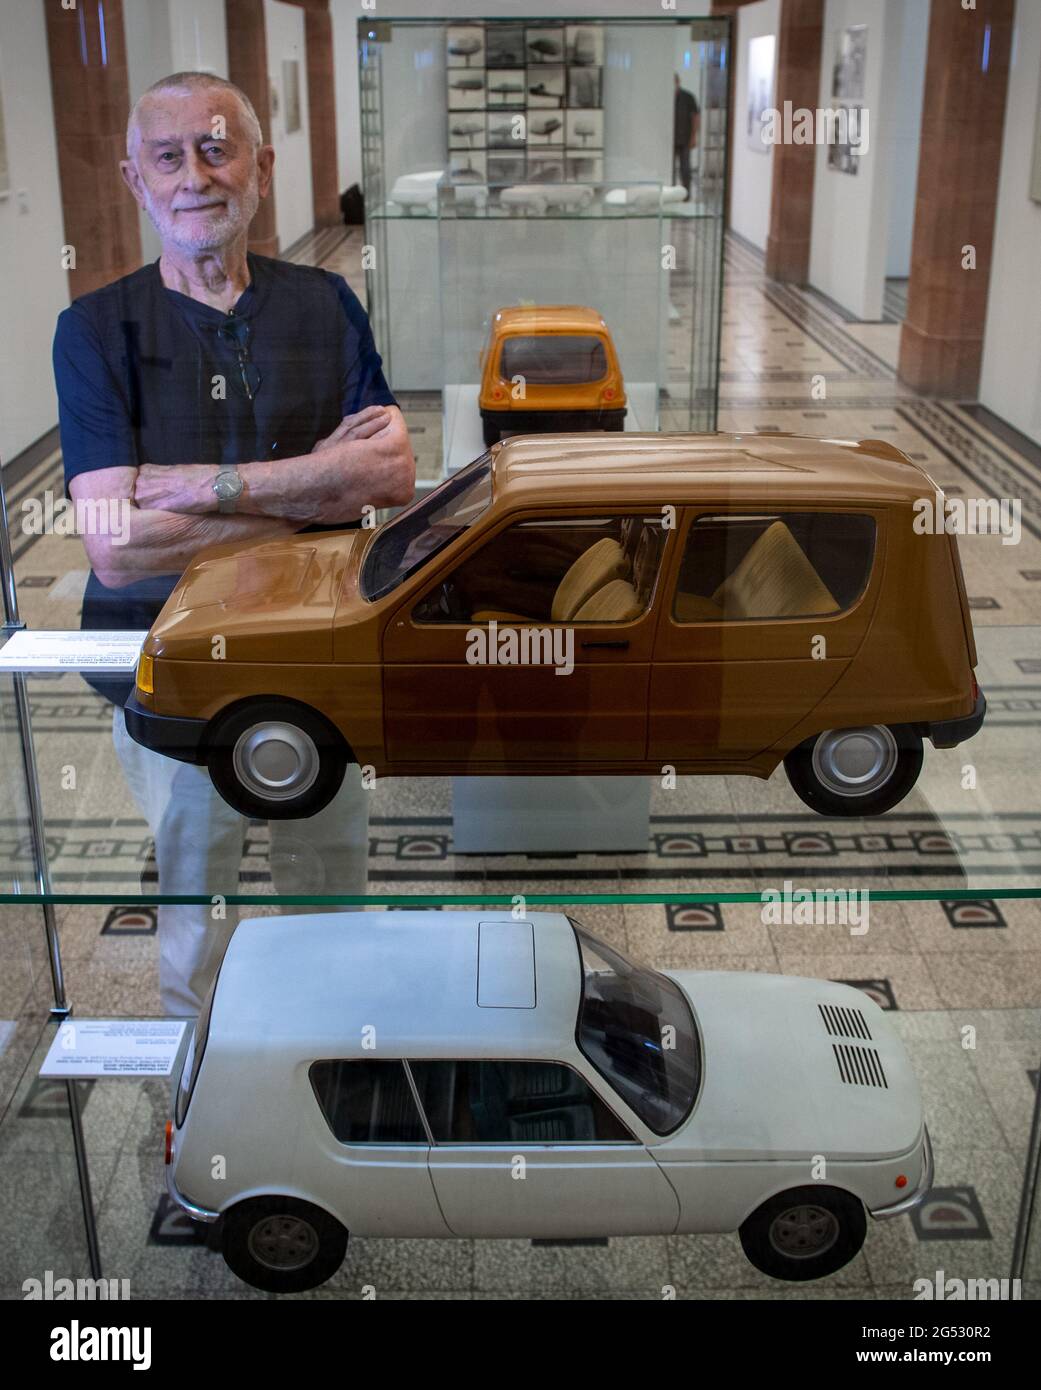 25 June 2021, Saxony, Chemnitz: In the Chemnitz Art Collections, the designer Karl Clauss Dietel stands behind a display case with models for the Trabant P601 N passenger car (station wagon), 1979/80 (above) and the Wartburg 353 Coupé passenger car, 1965/66, which he designed together with the designer Lutz Rudolph. Entitled 'Simson, Diamant, Erika - Form Design by Karl Clauss Dietel', the show provides an insight into the designer's oeuvre. Aware of the importance of a cohesive oeuvre, Dietel archived his life's work for decades and in 2019 handed it over in its entirety to the care of the St Stock Photo